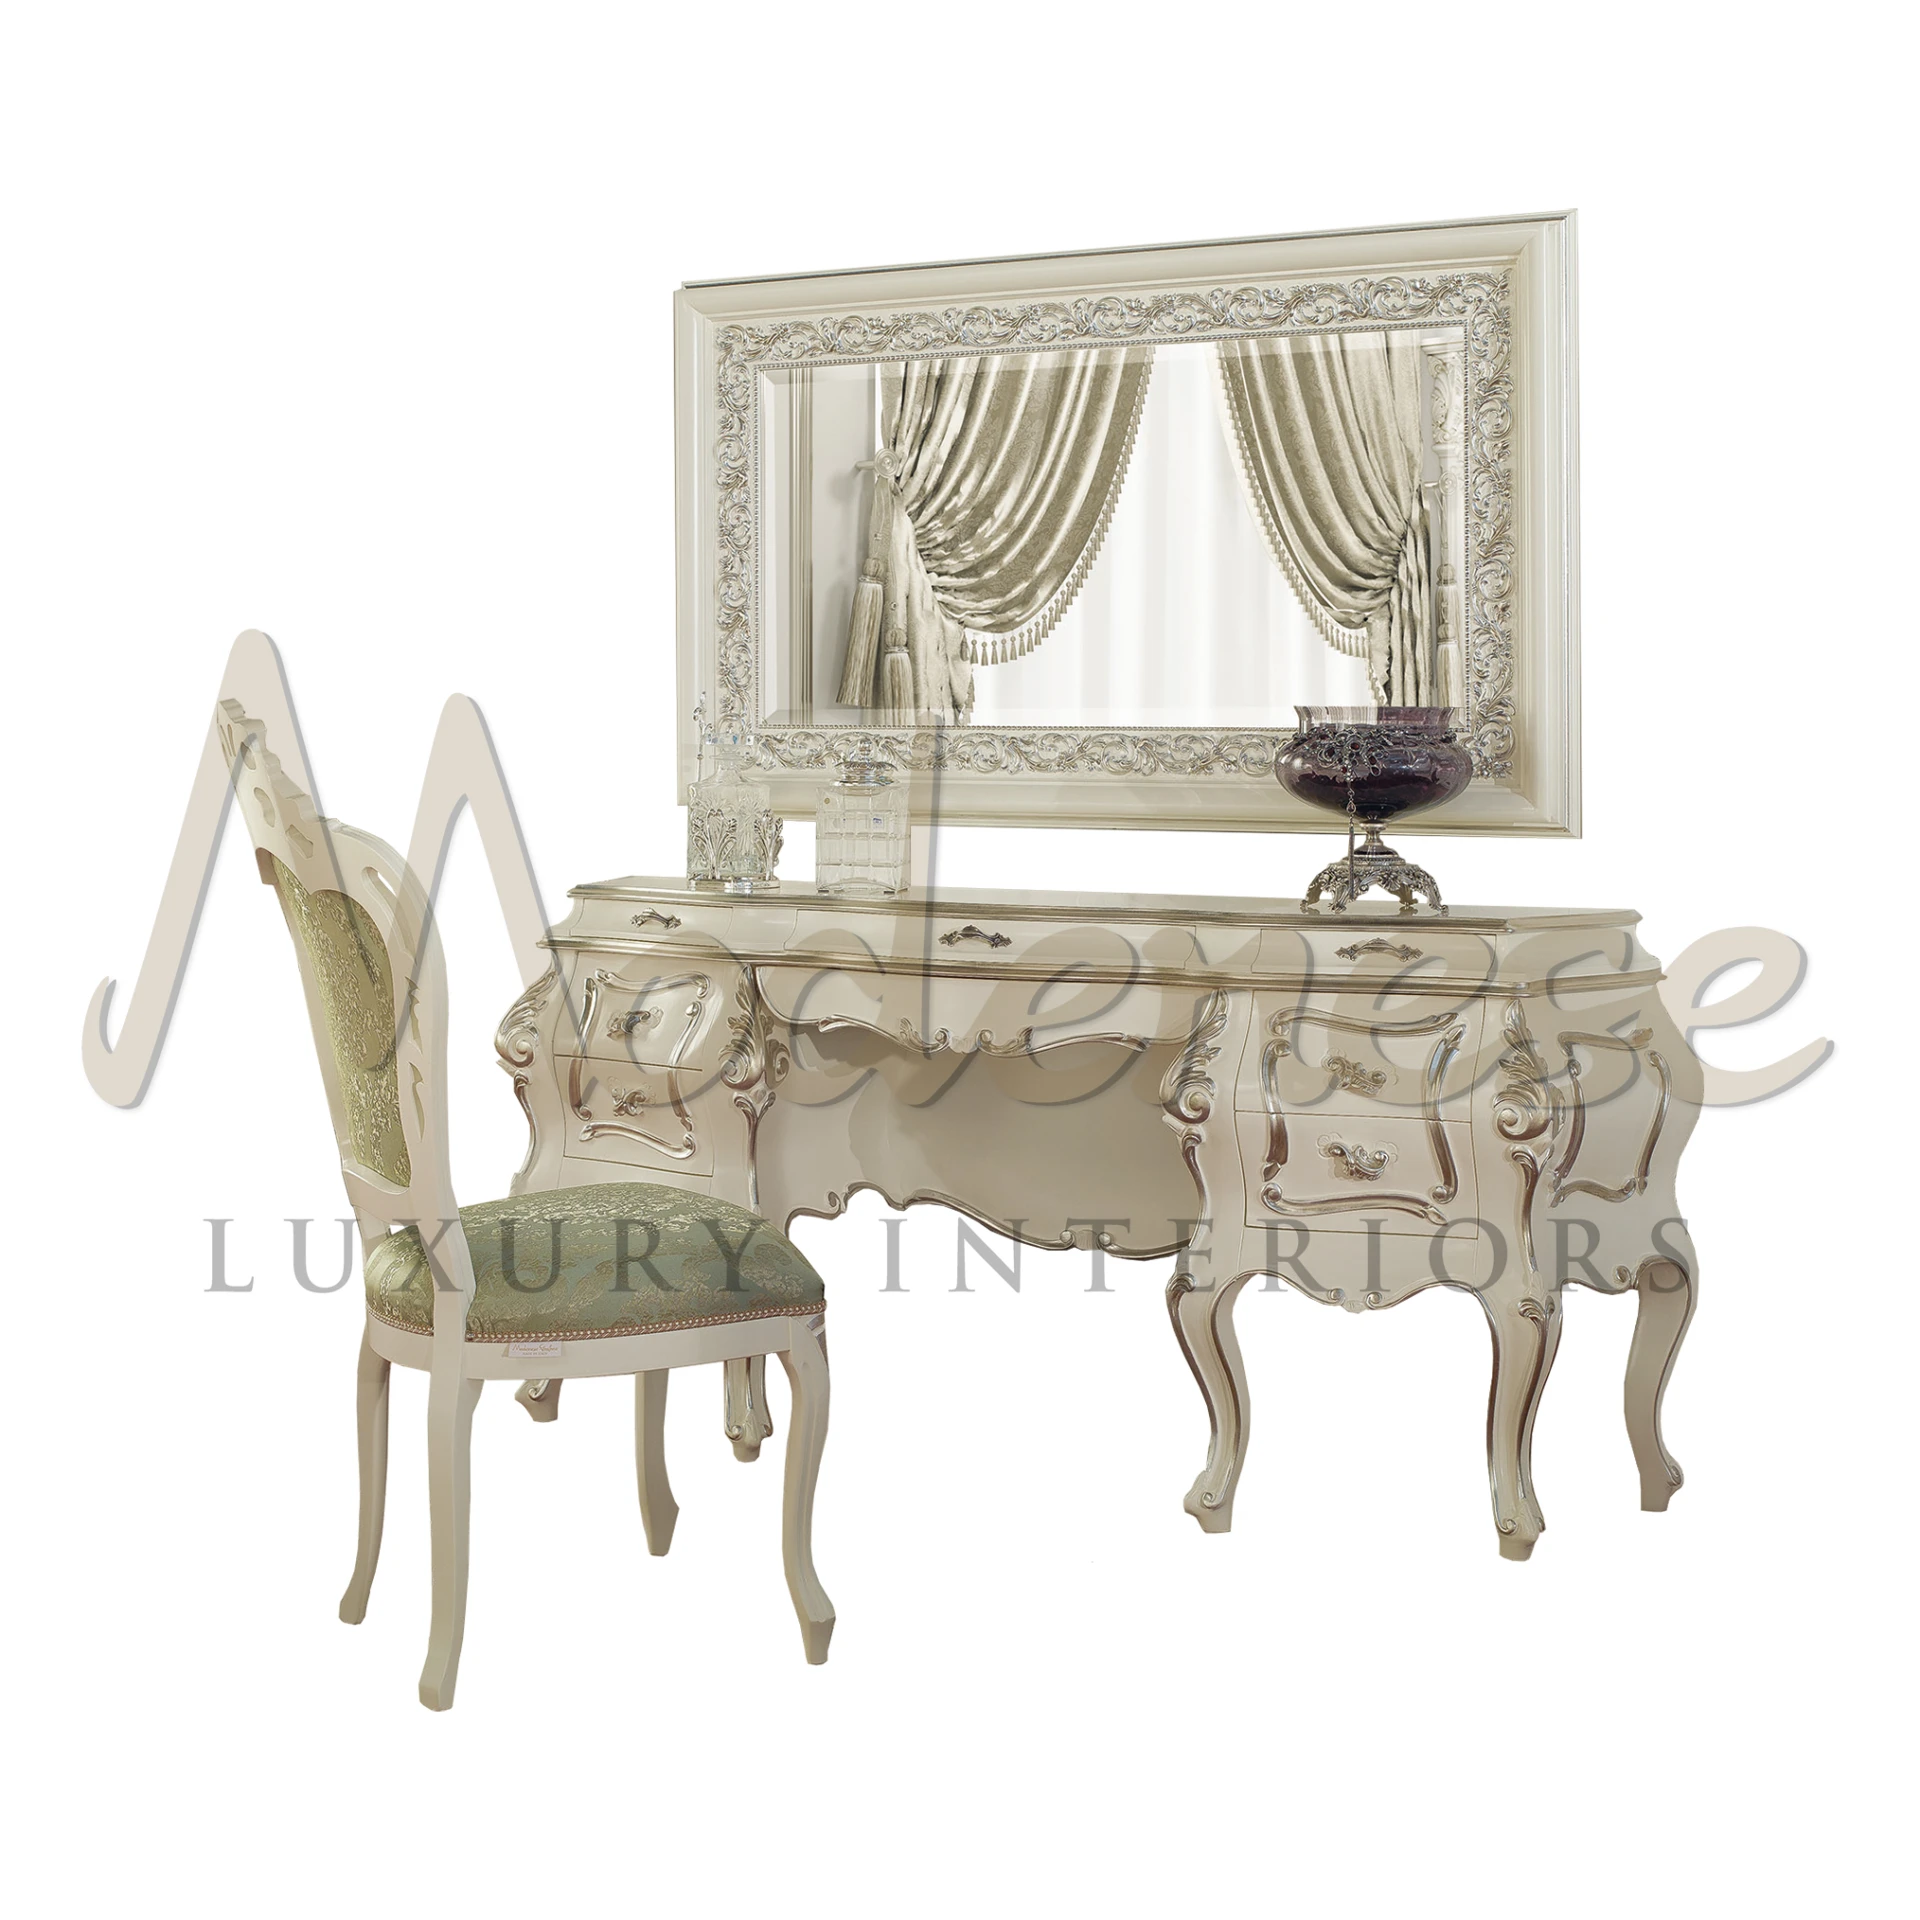 A sophisticated dressing table set by Modenese in cream, featuring an ornate mirror, a matching chair with fabric upholstery, and an elegant bowl on the table.